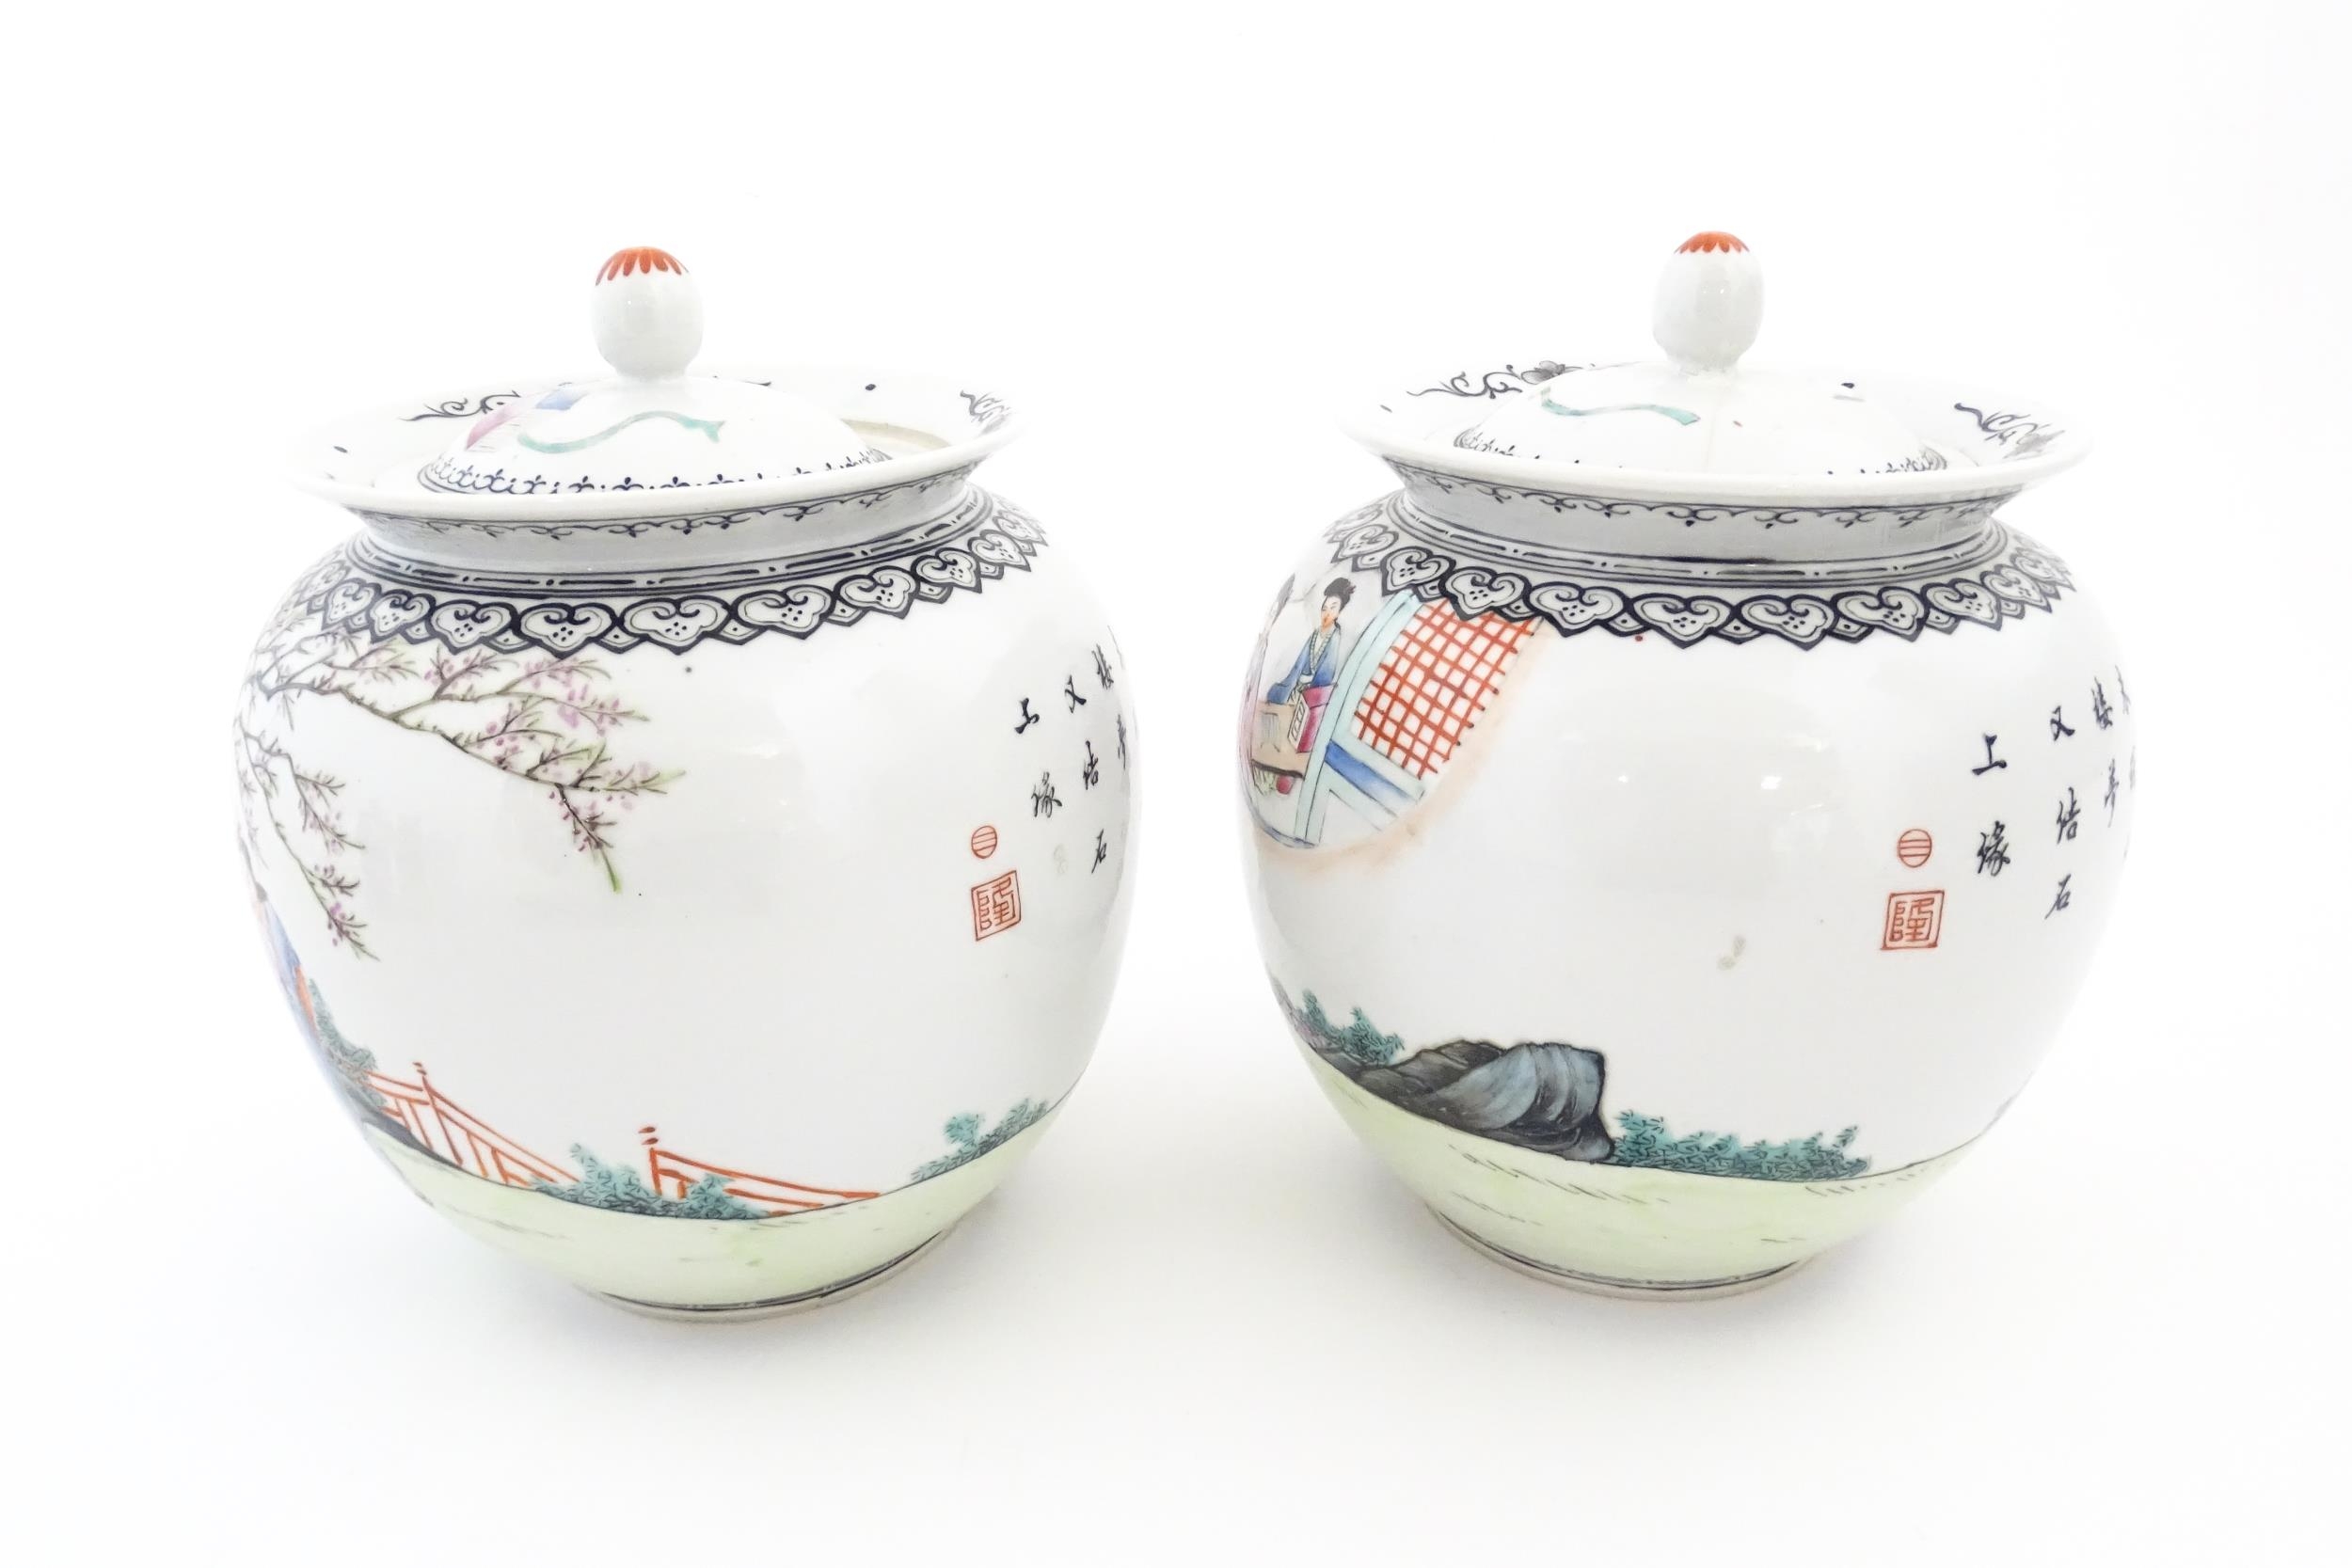 A pair of Chinese pot and cover vases decorated with ladies in a landscapes, and Character script. - Image 5 of 10